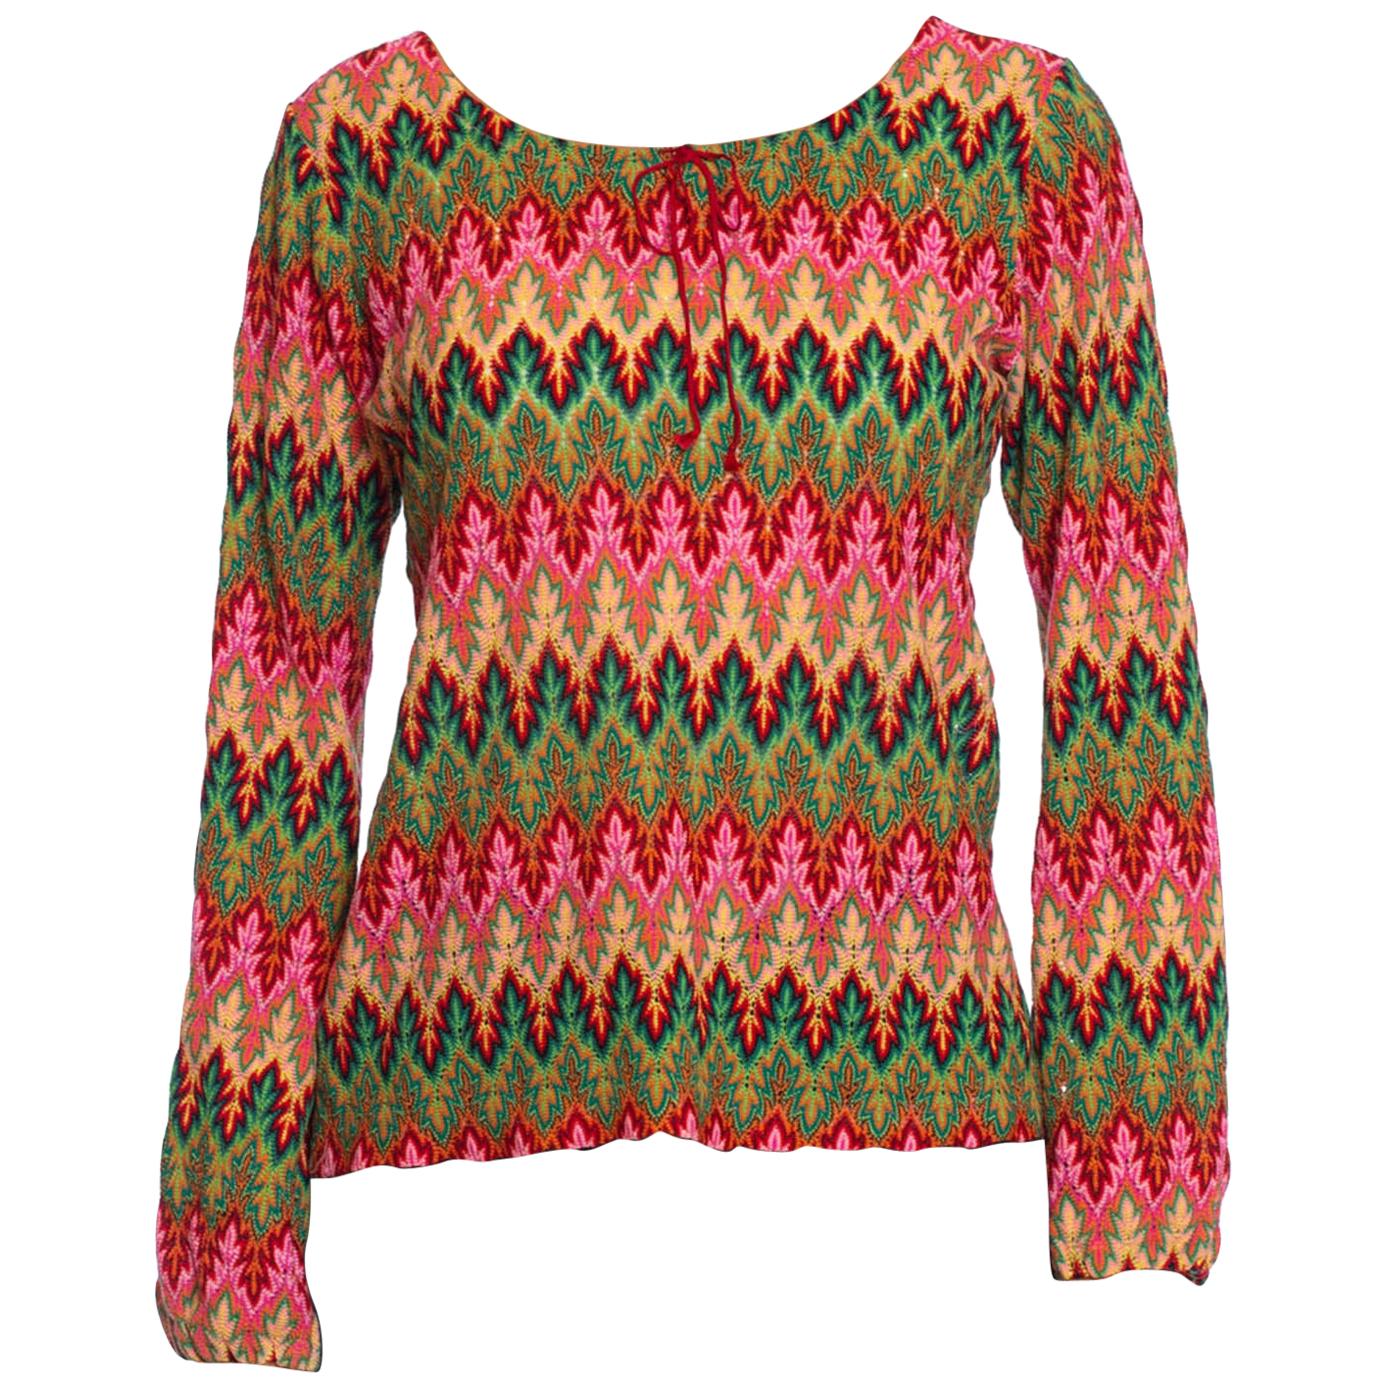 1970S MISSONI Style Pink & Green Acrylic Knit Boho Top Made In Japan